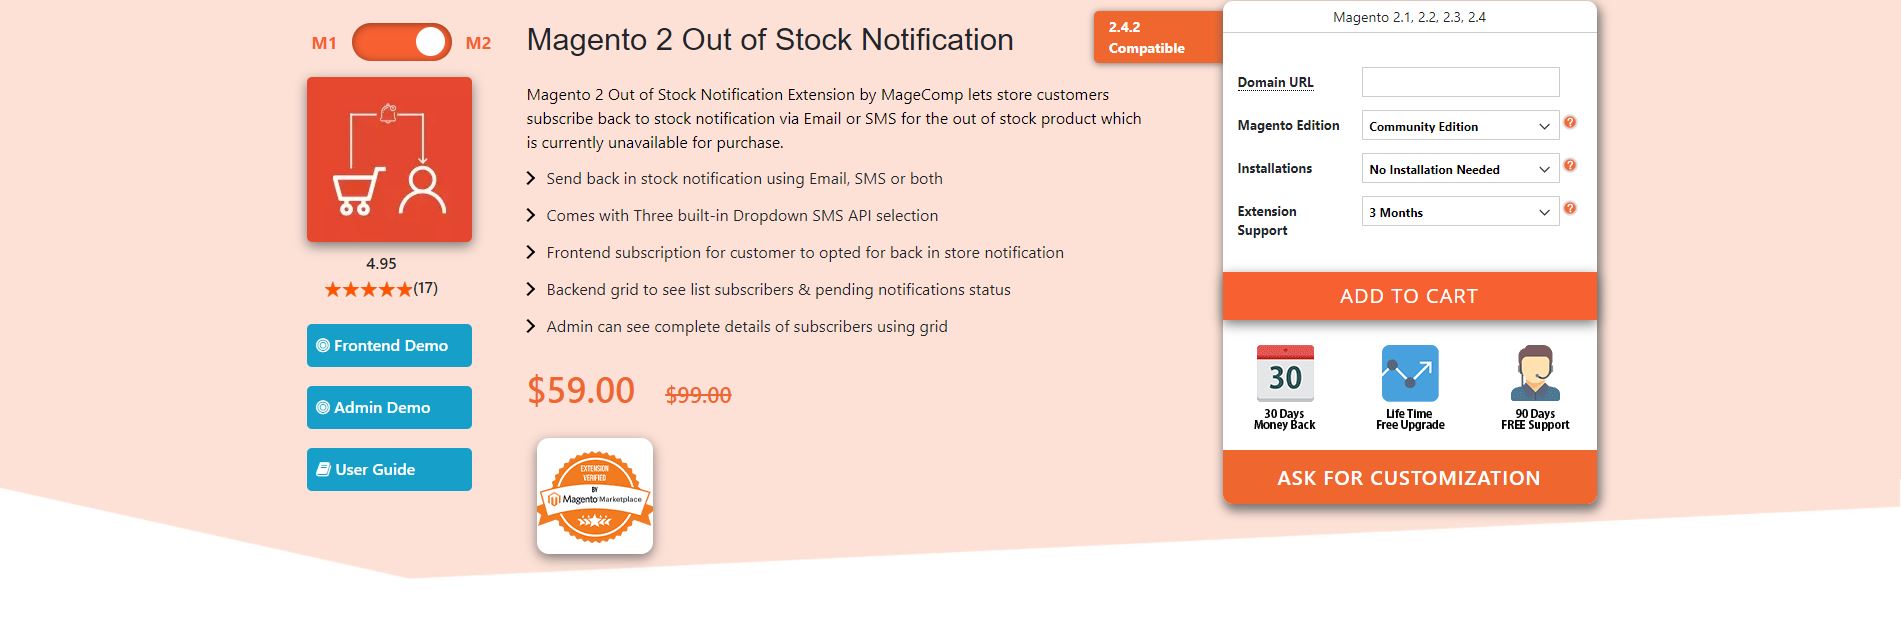 Magento out of stock notification extension